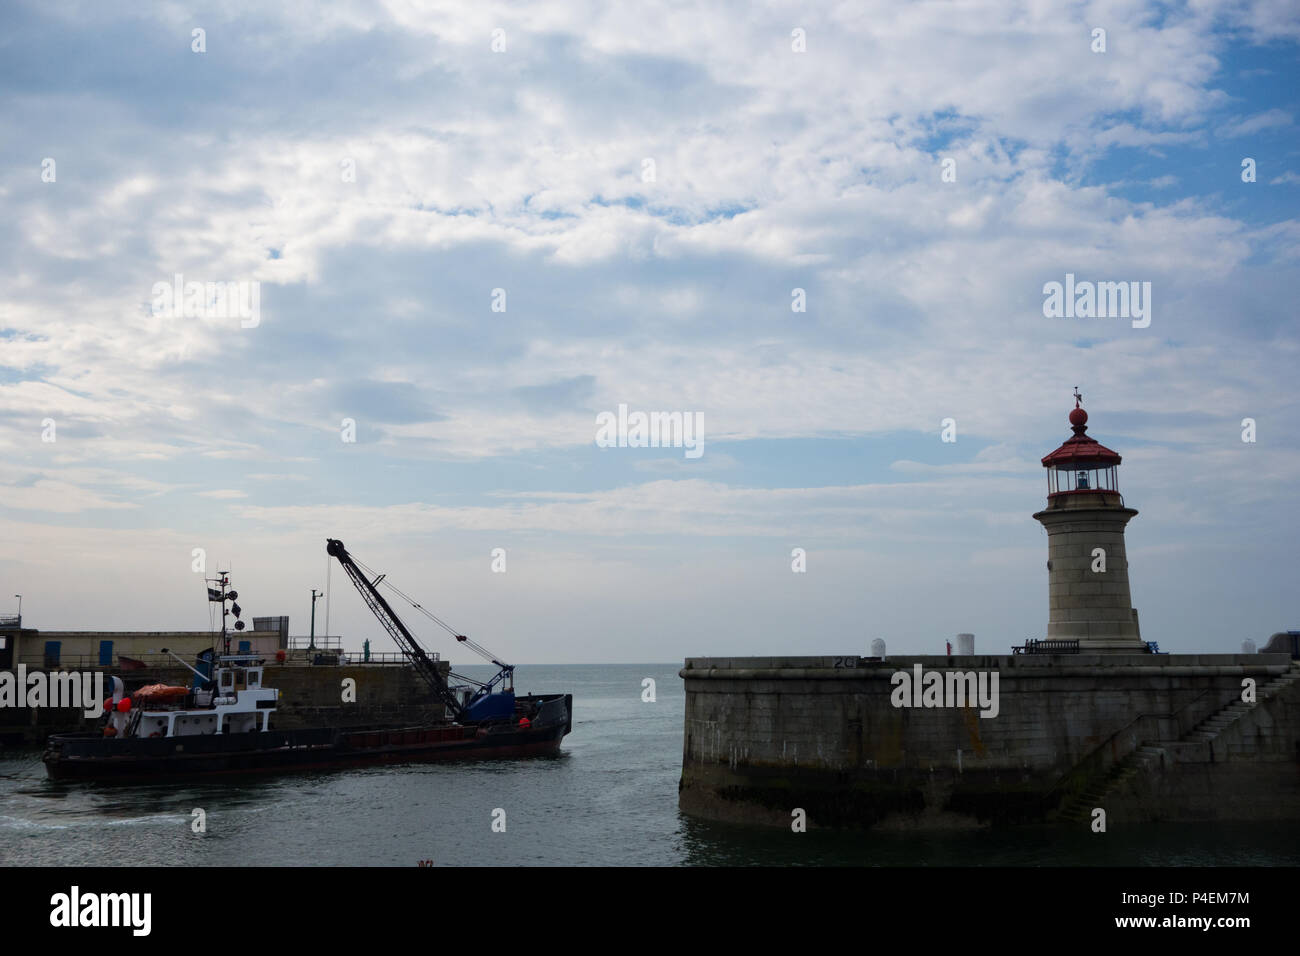 A boat Dredges the entrance to Ramsgate Marina, UK Stock Photo